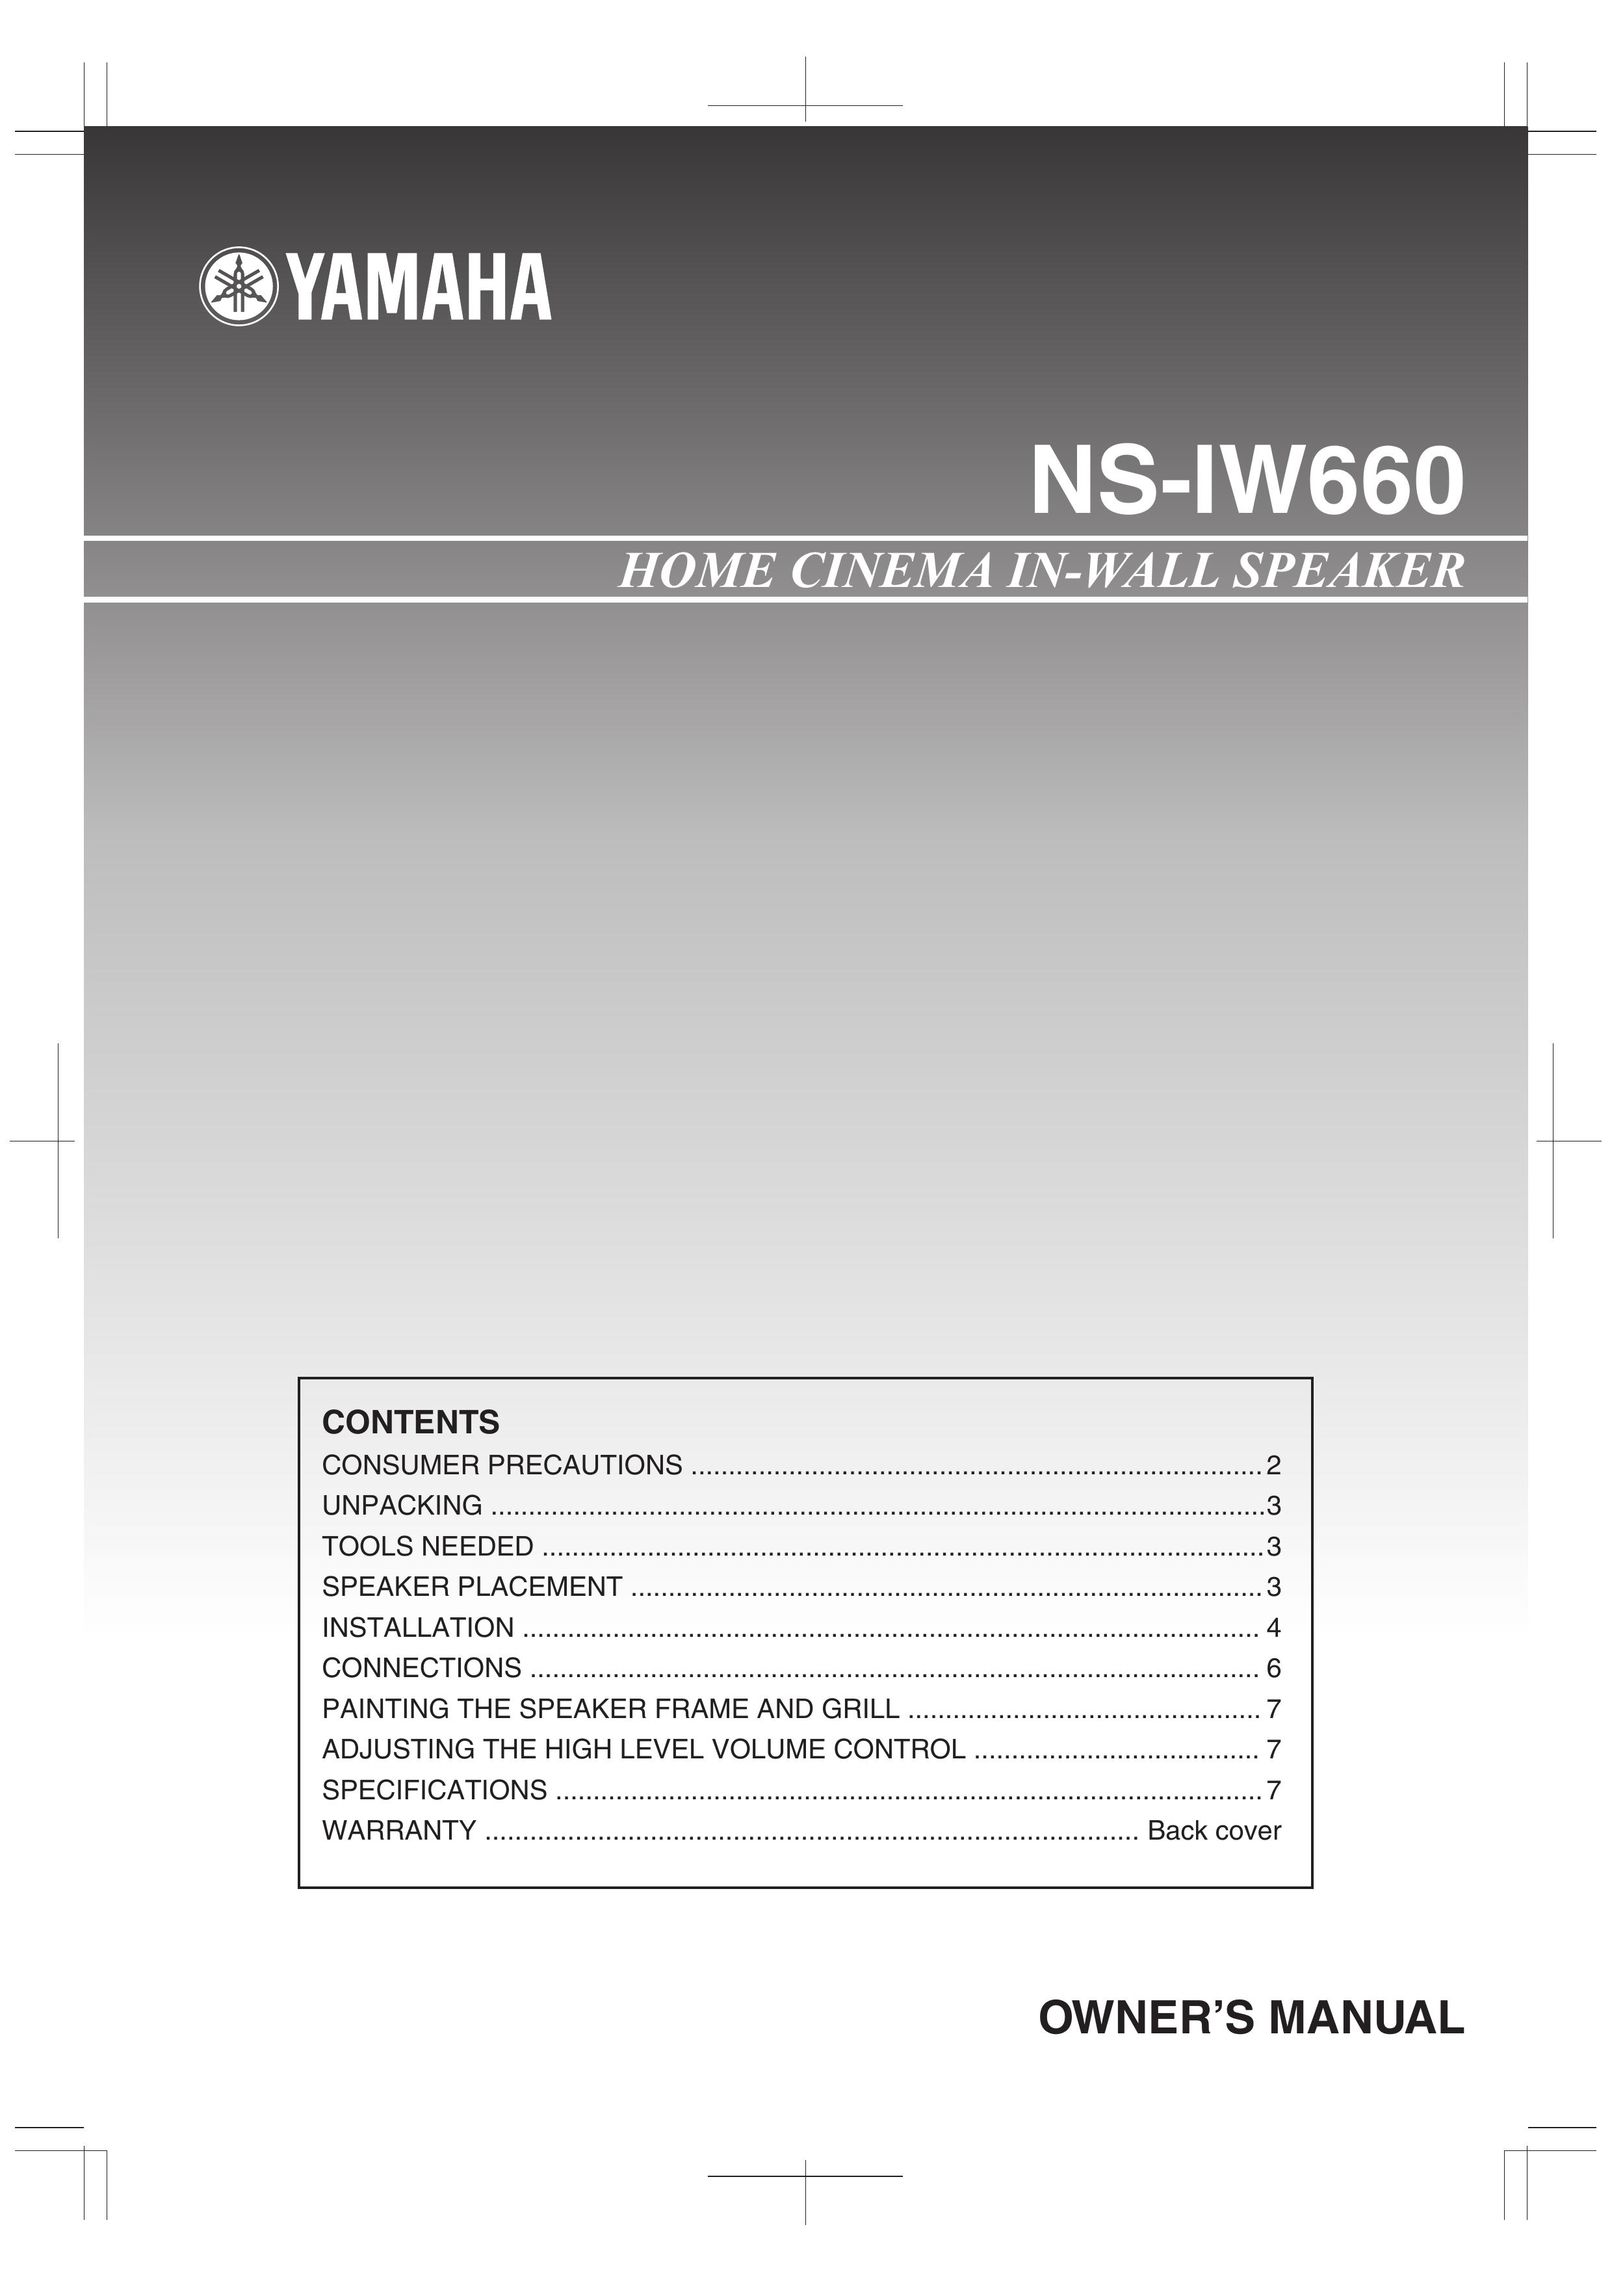 Yamaha NS-IW660 Home Theater System User Manual